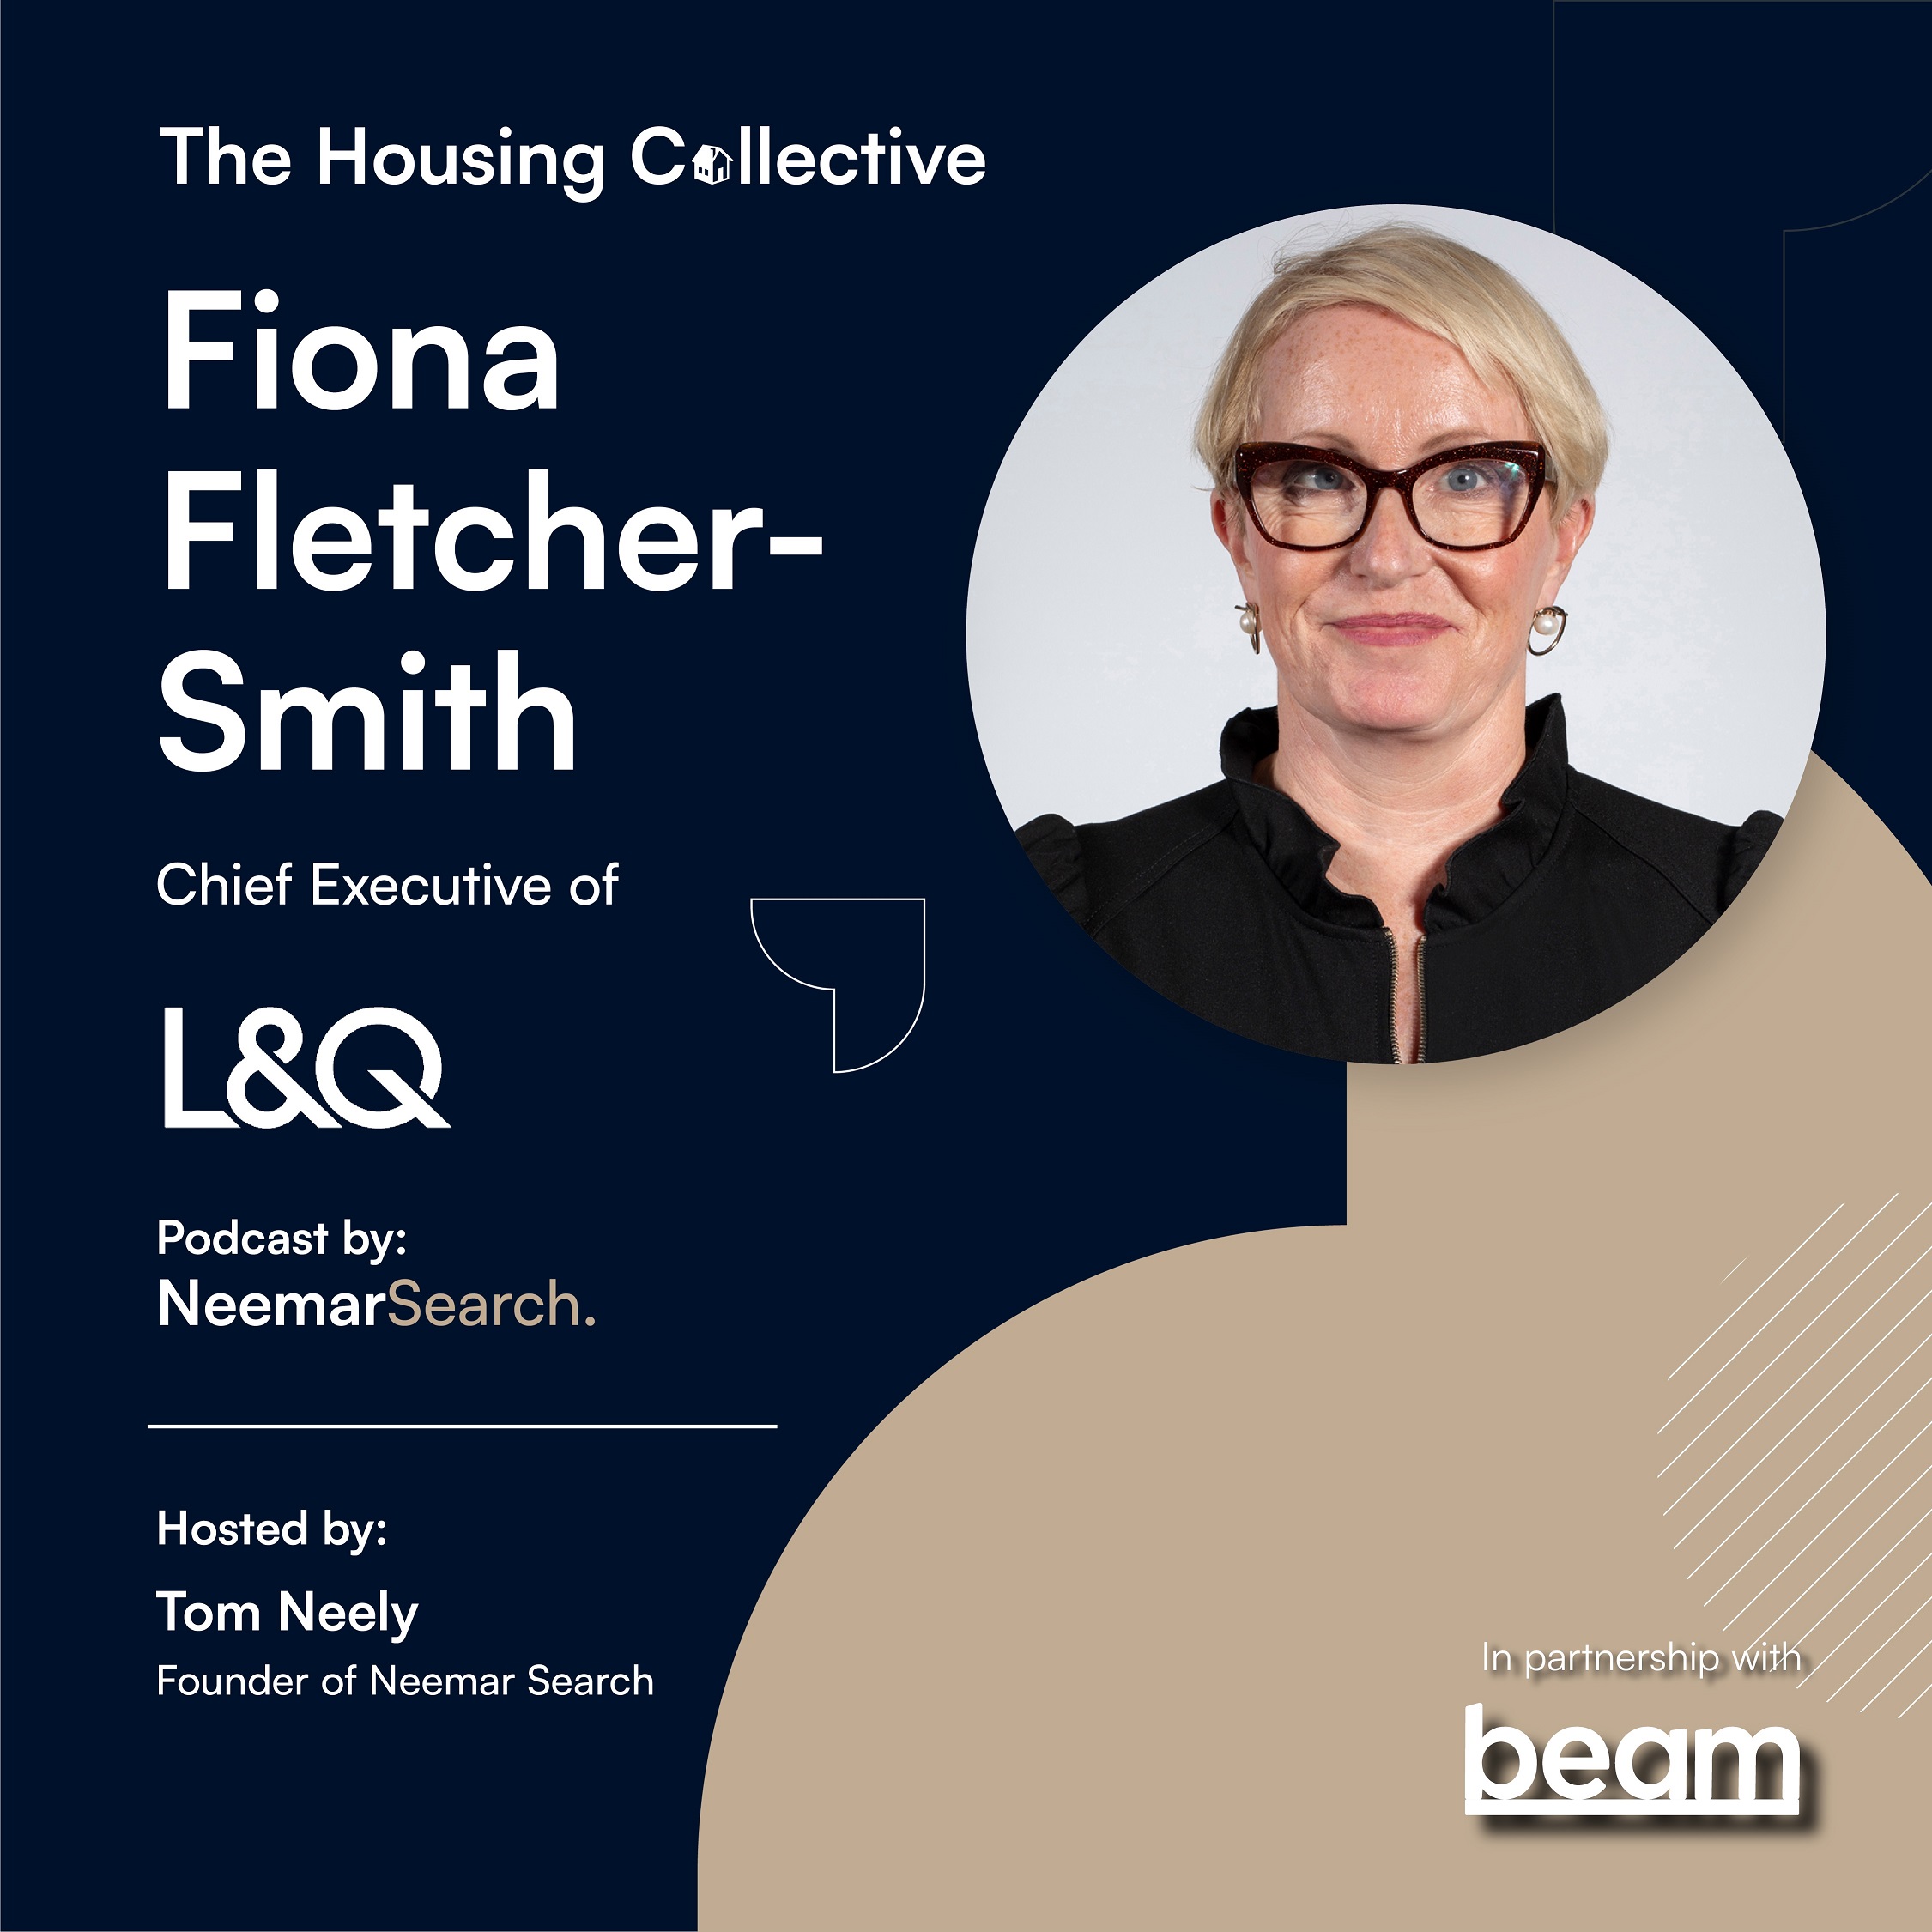 The Housing Collective: Defining Your Leadership Style